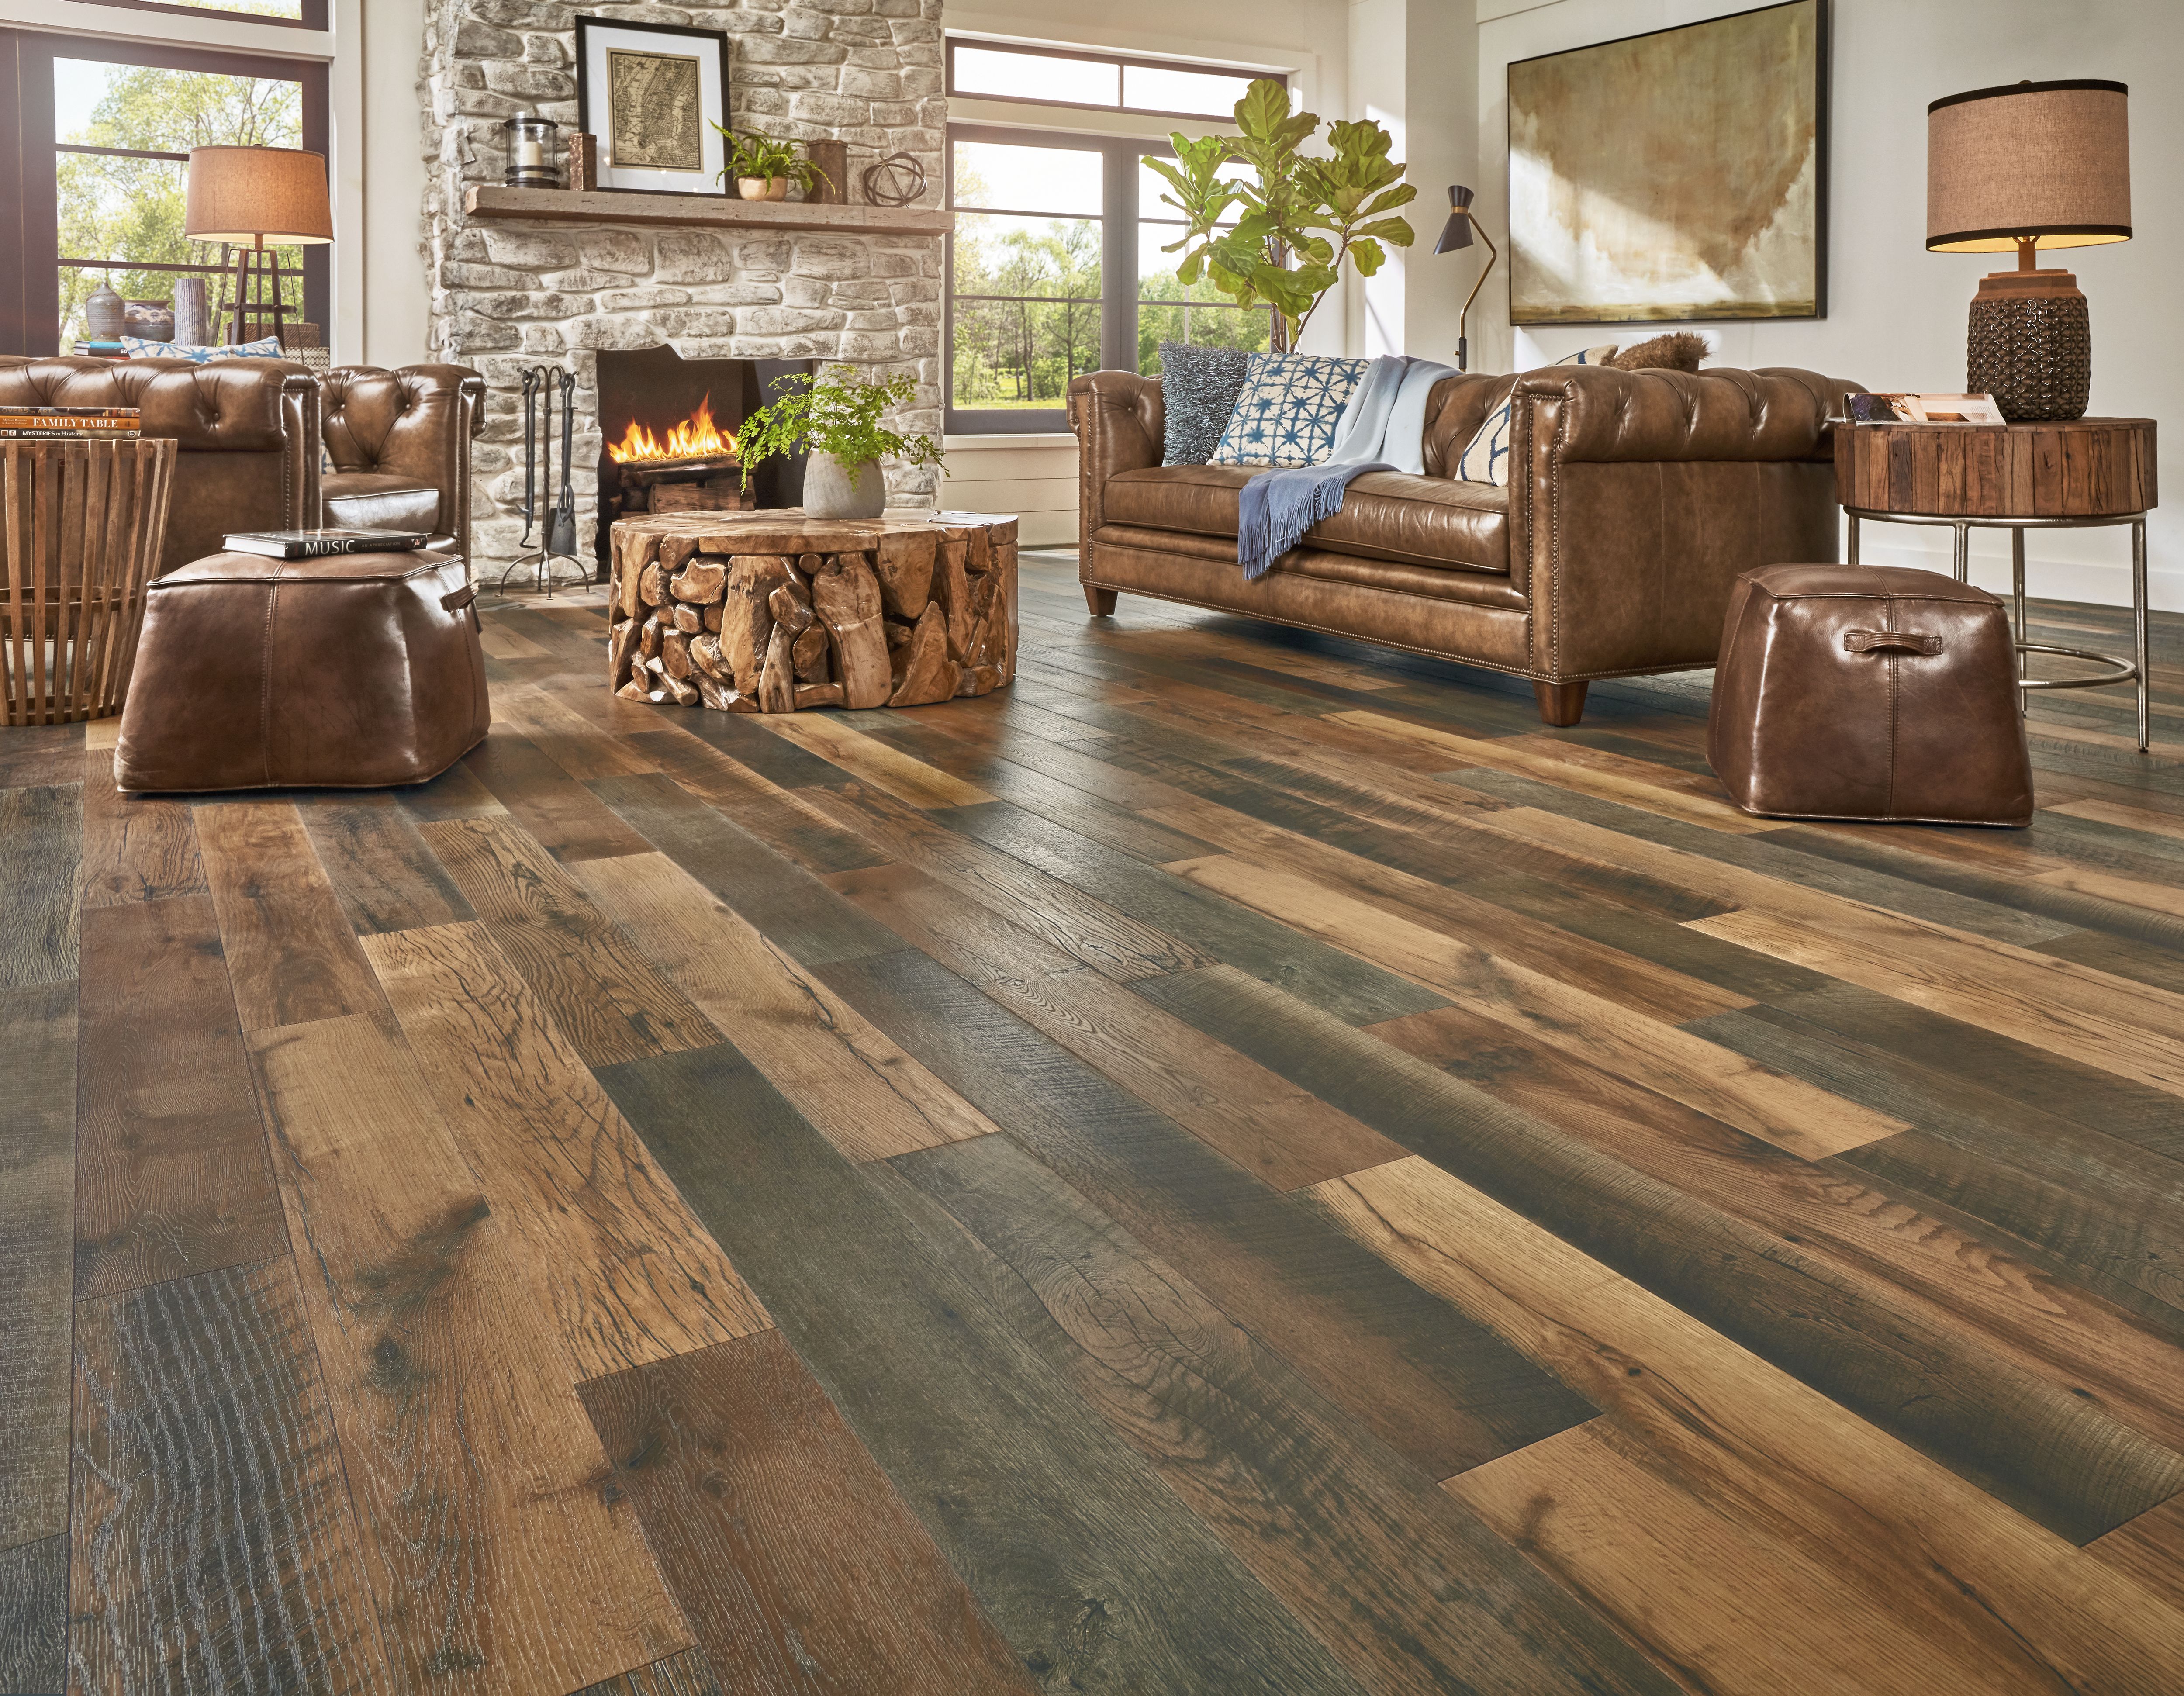 Find Pergo Flooring For You, What Laminate Flooring Is Better Than Pergo